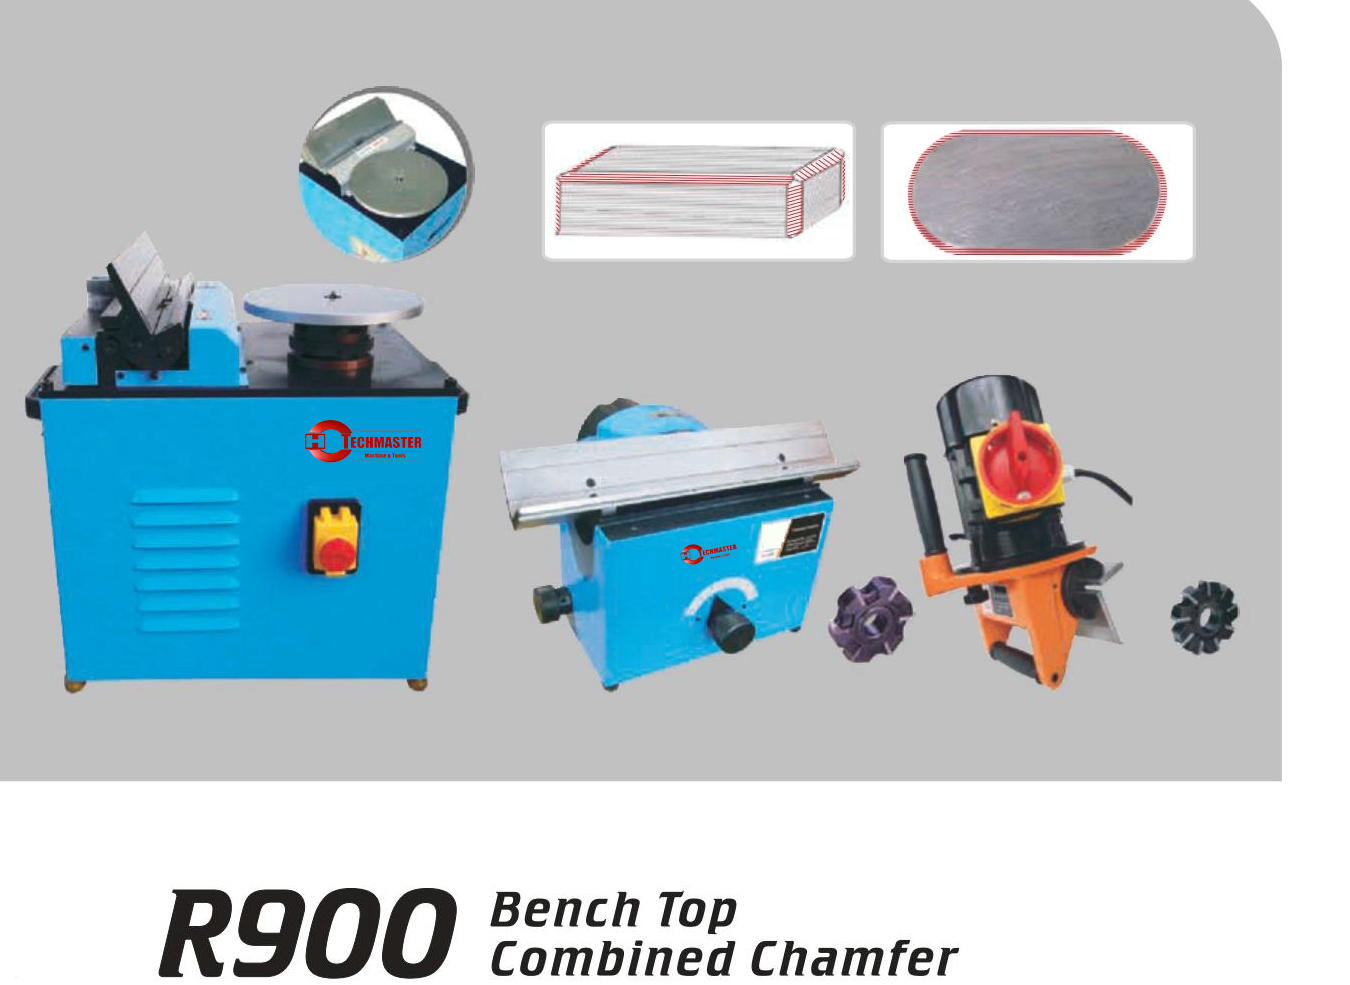 BENCH TOP COMBINED CHAMFER R900-R300-R200